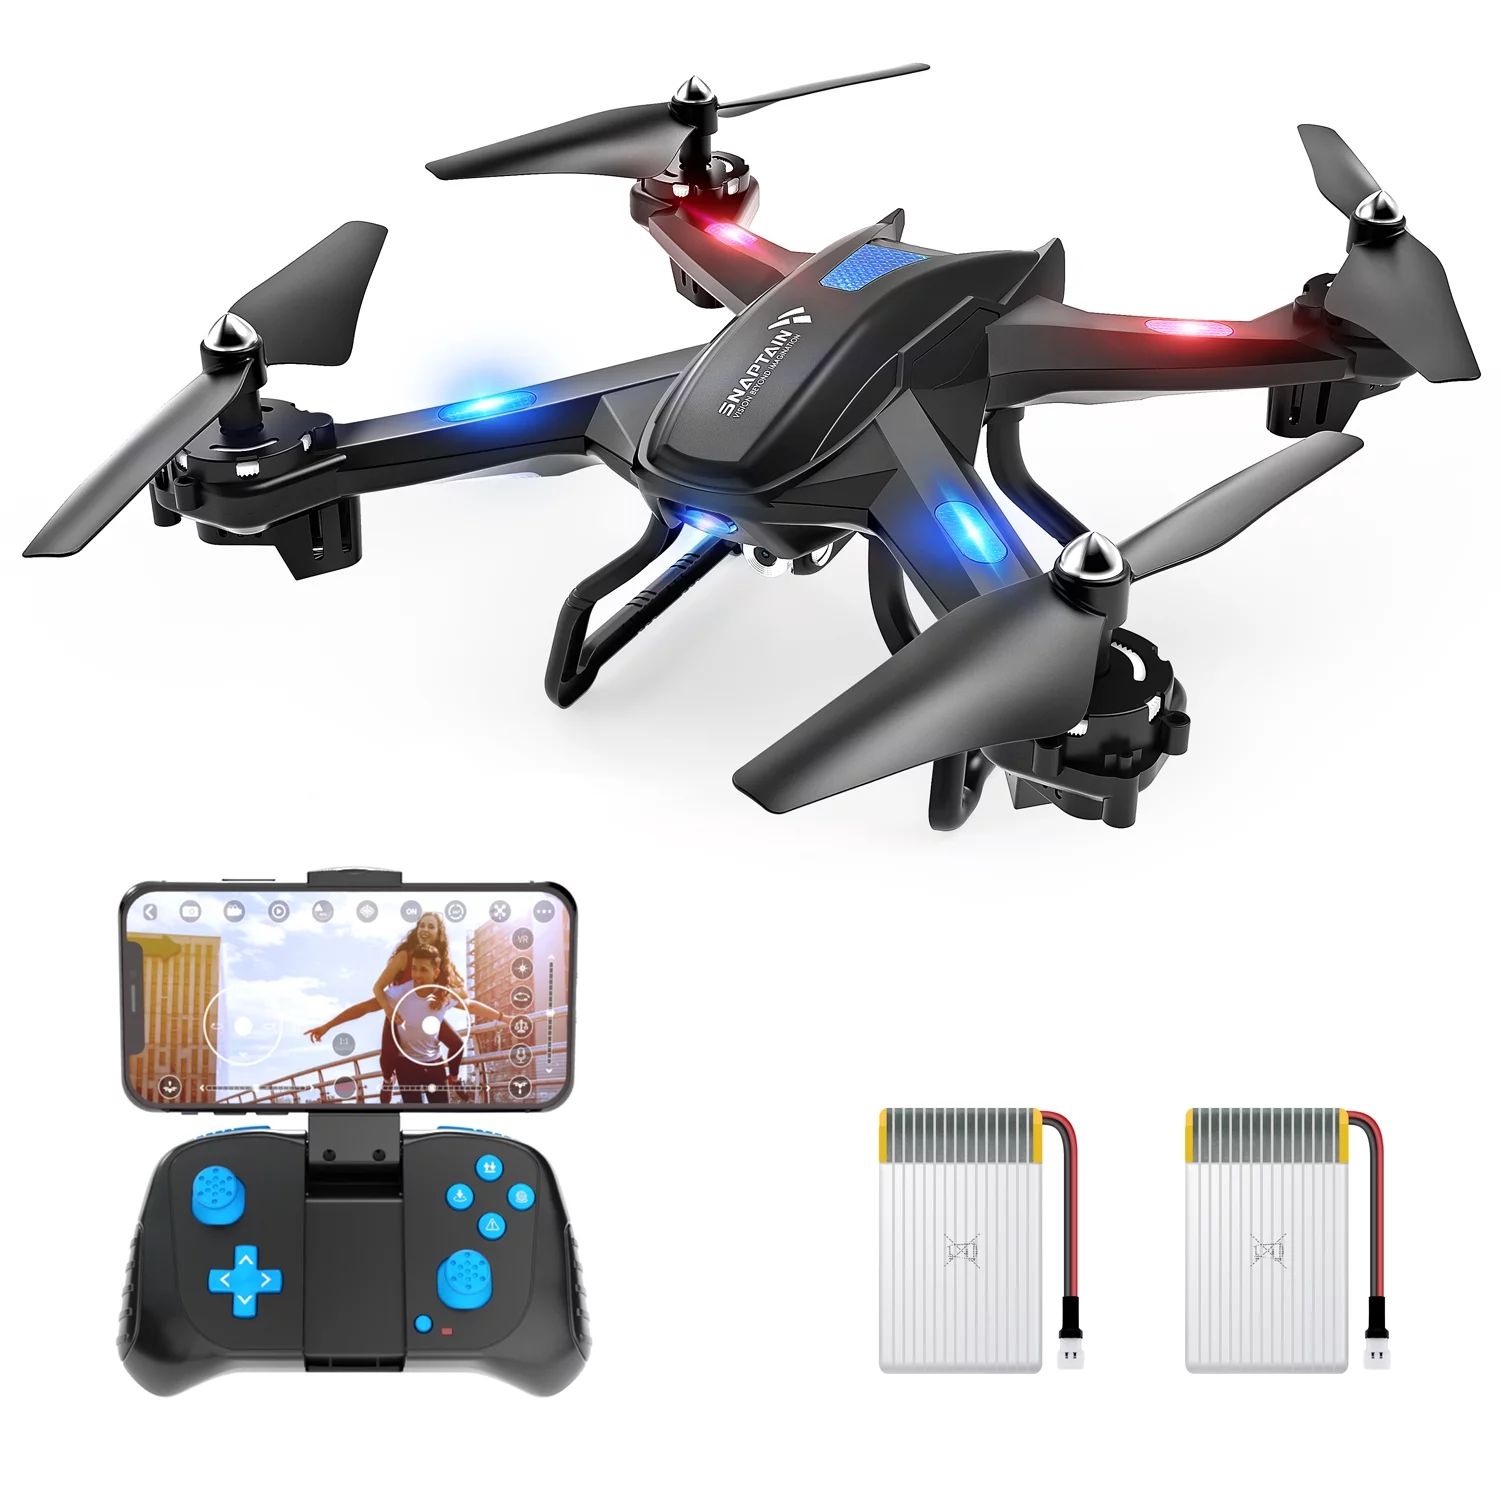 SNAPTAIN S5C WiFi FPV Drone with 720P HD Camera, Voice Control, Gesture Control RC Quadcopter for... | Walmart (US)